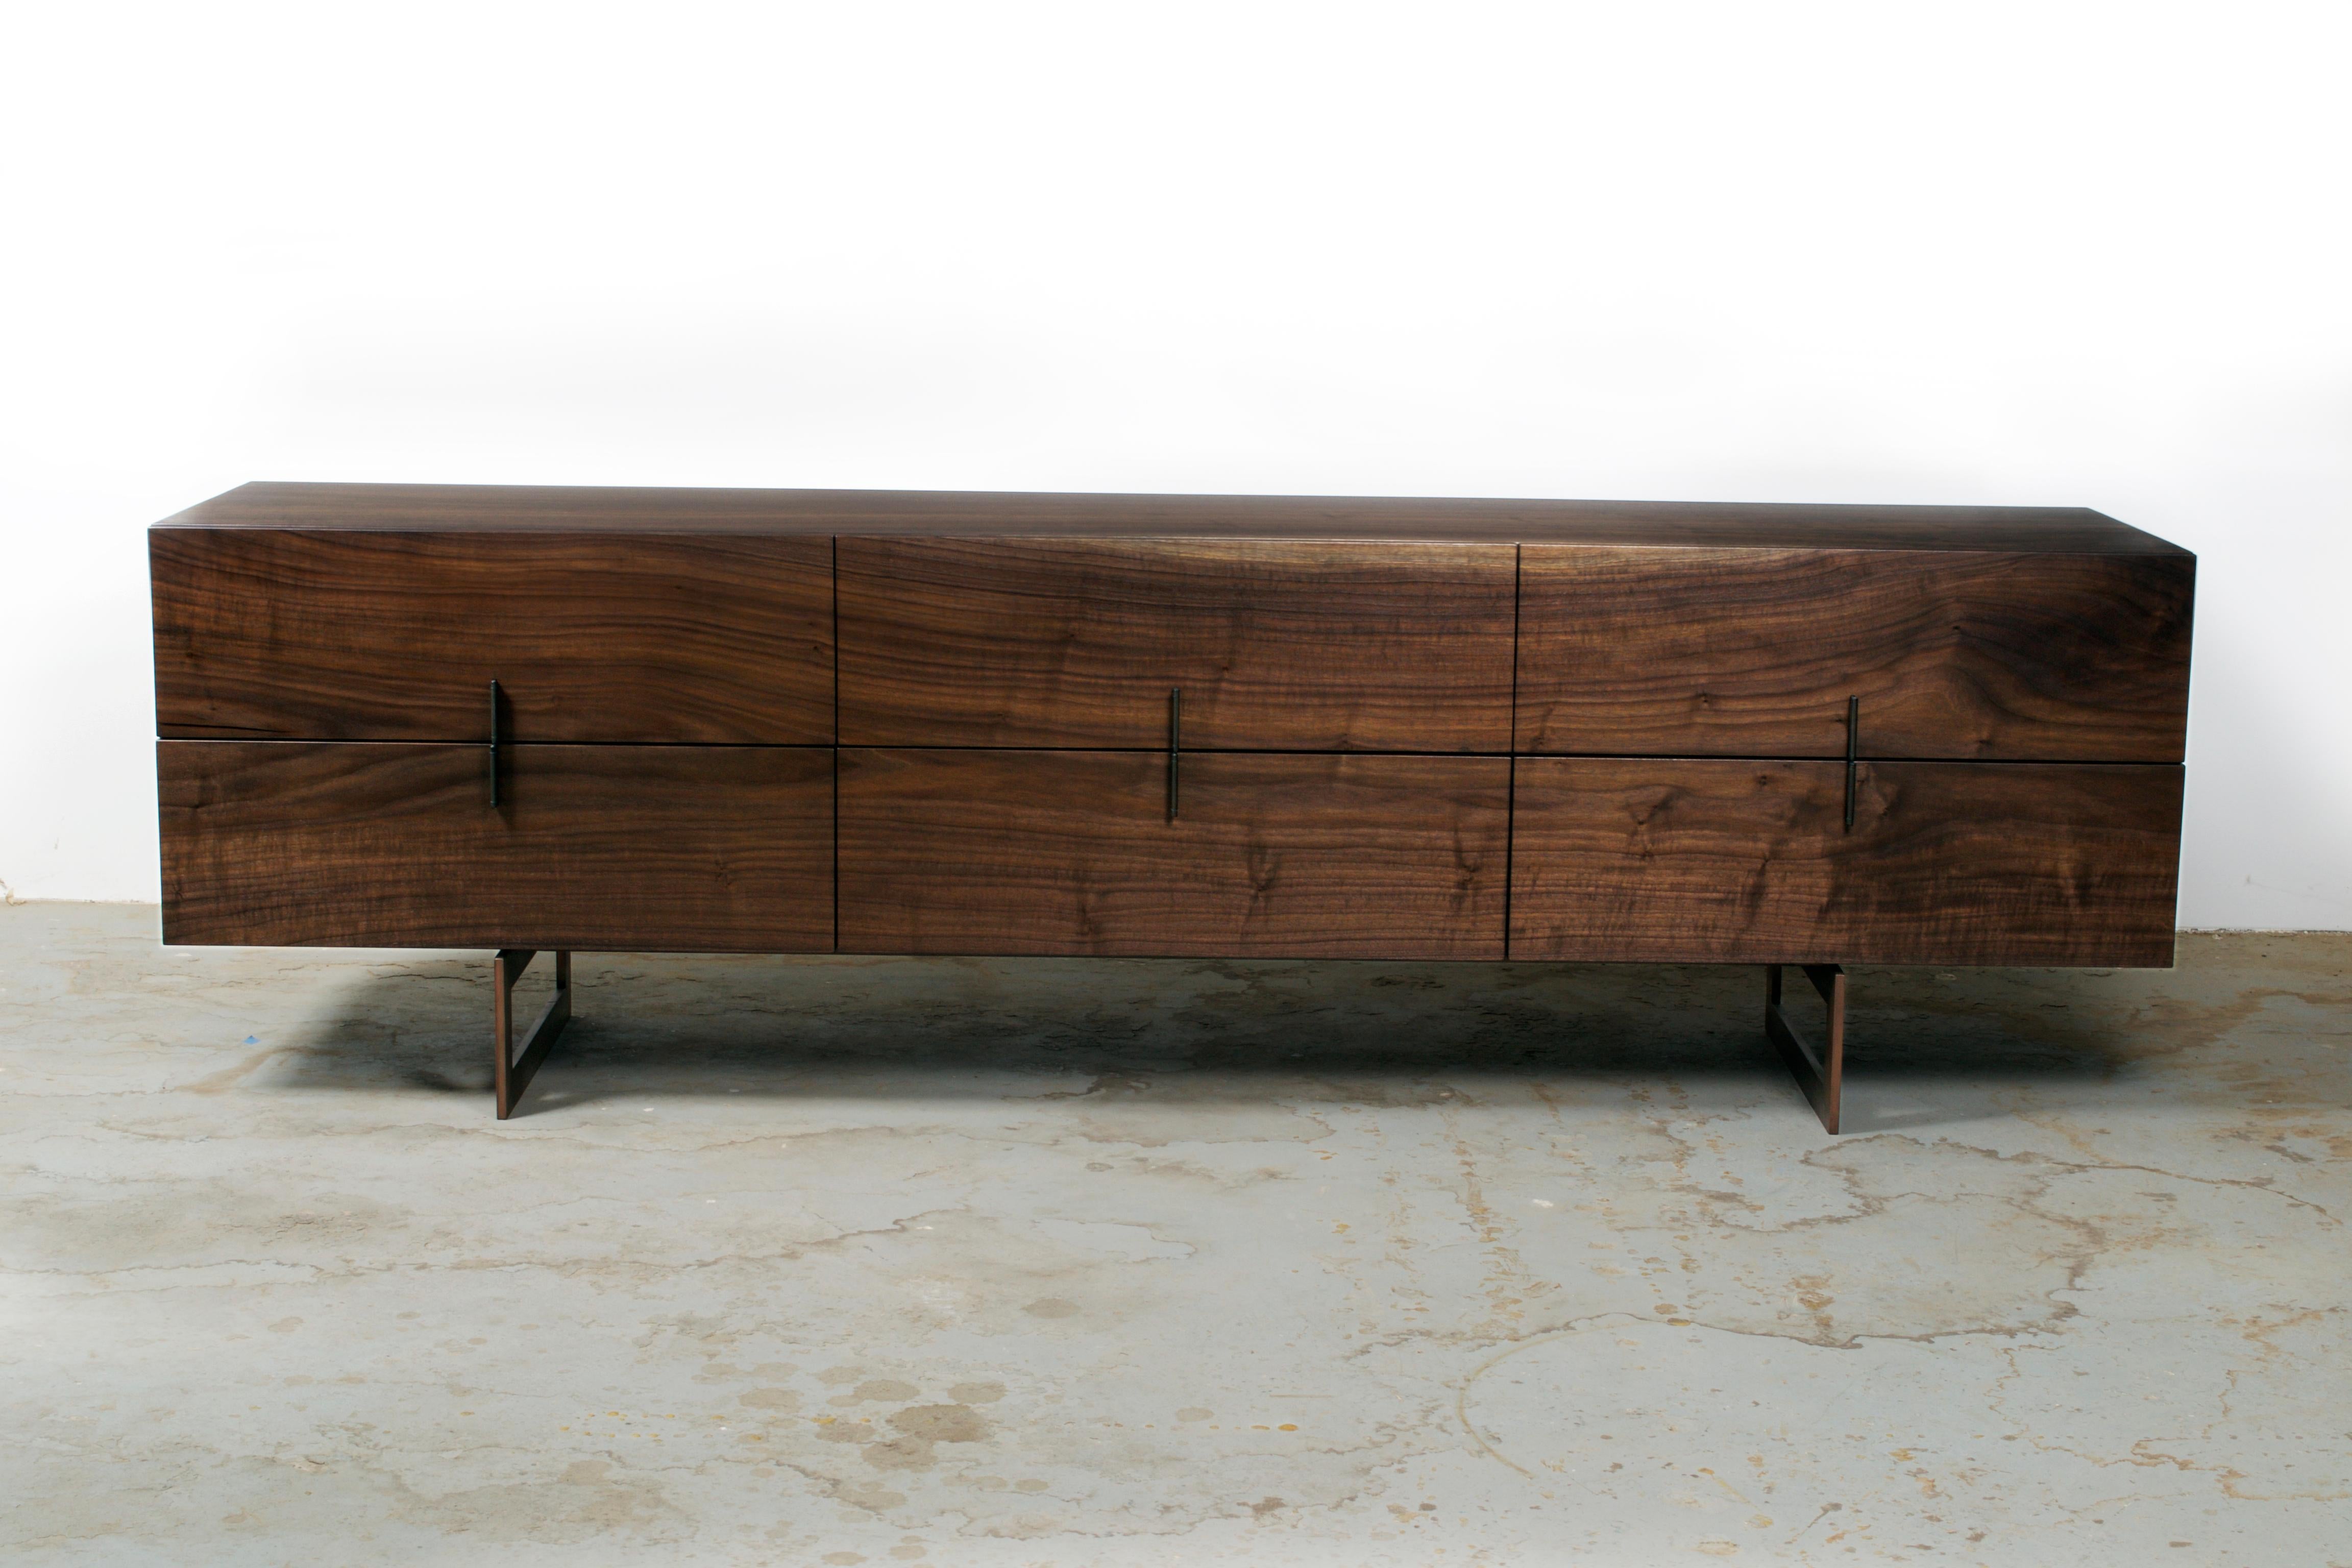 Made from sequentially cut pieces of wide solid walnut this long, low, 6-drawer dresser was an exercise in matching grain. Drawer fronts are a bookmatched mirror image of the top, with the grain flowing seamlessly over bookmatched miter folded